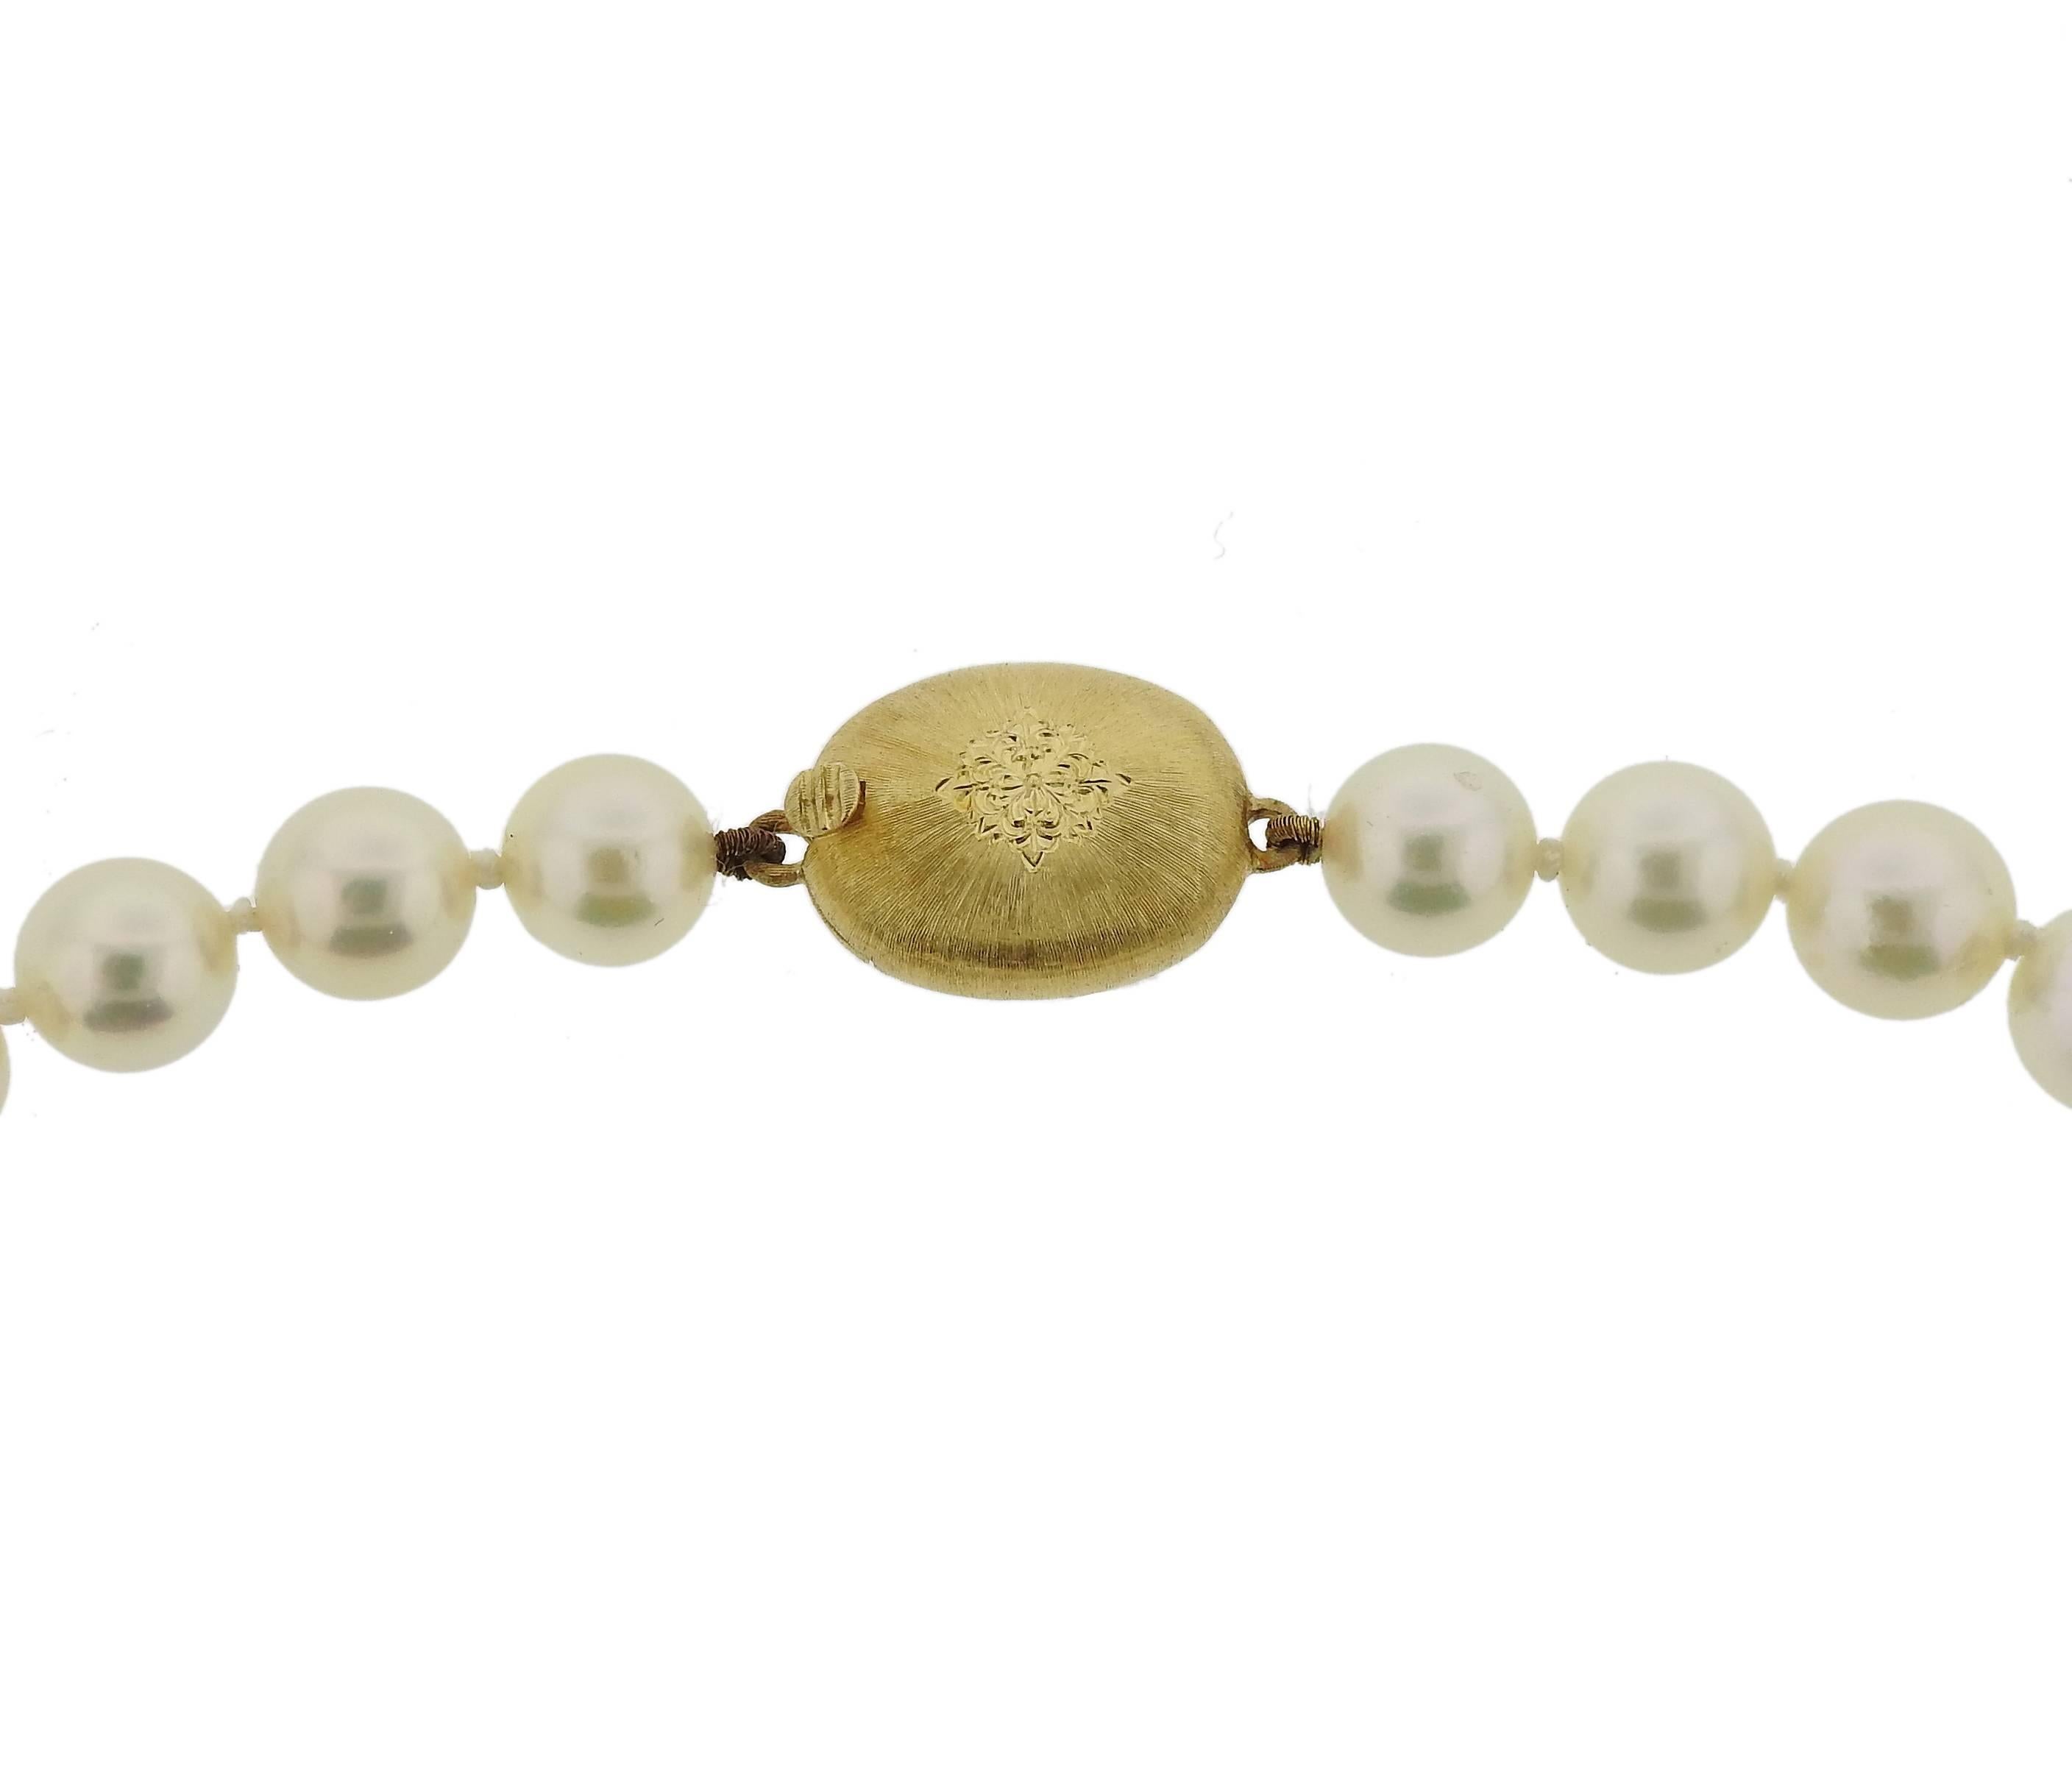 Classic pearl necklace, crafted by Buccellati, set with a classic 18k yellow gold clasp. Necklace is 18 1/2